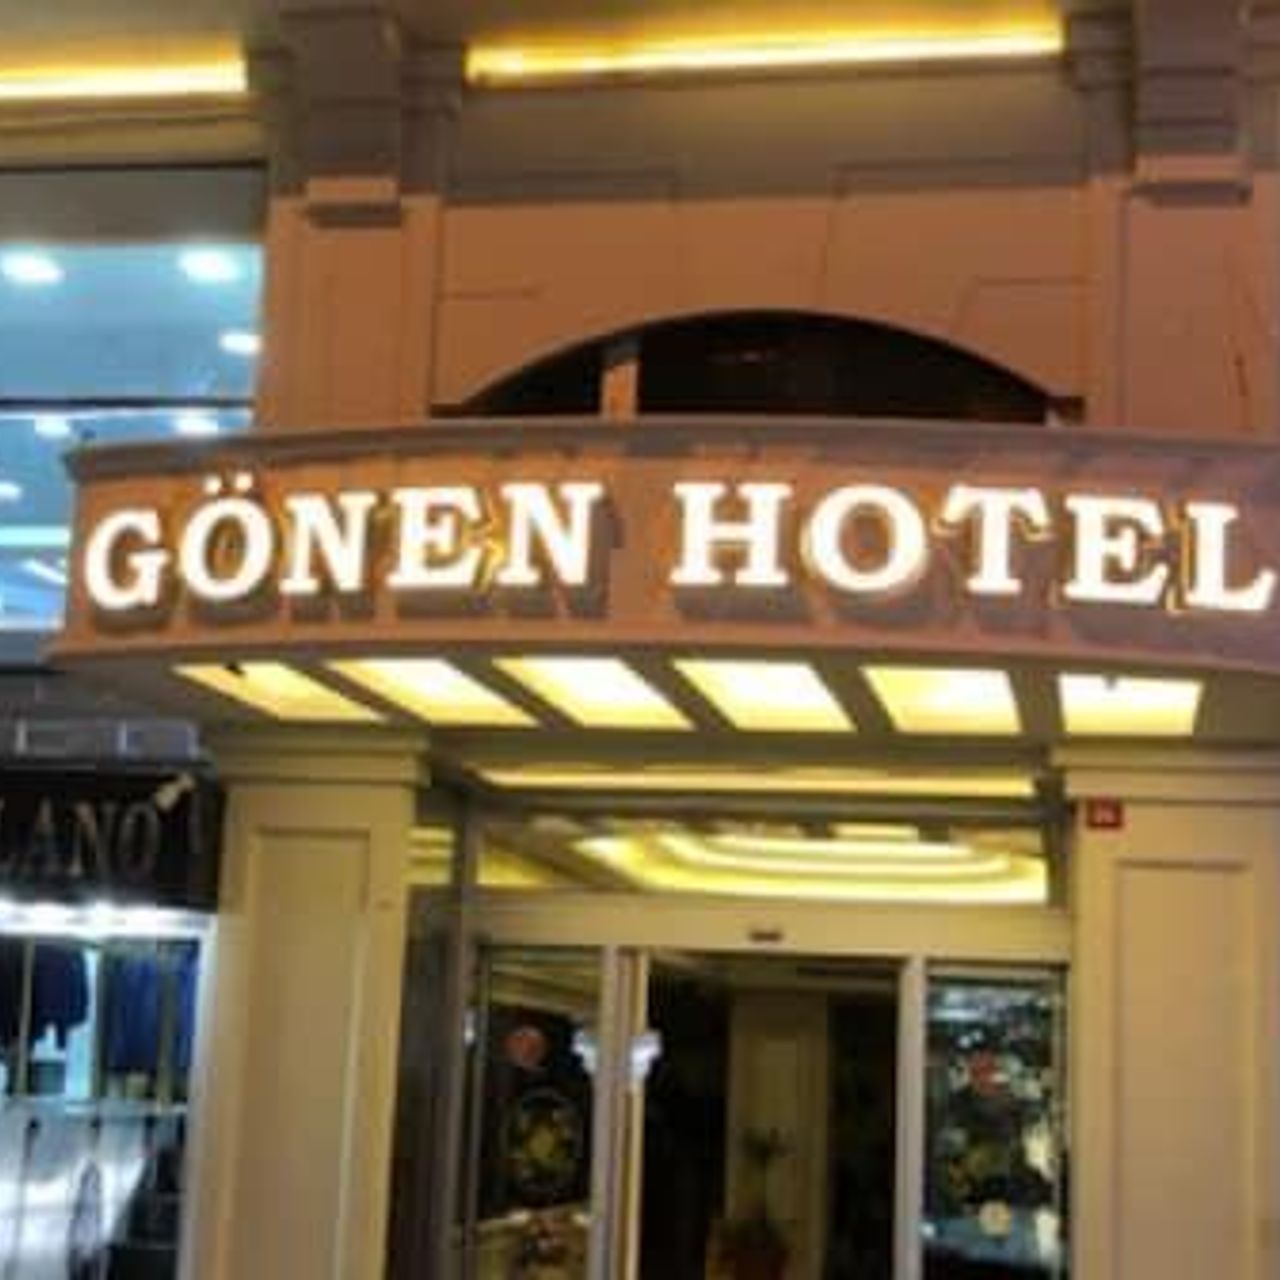 Laleli Gonen Hotel - Istanbul - Great prices at HOTEL INFO